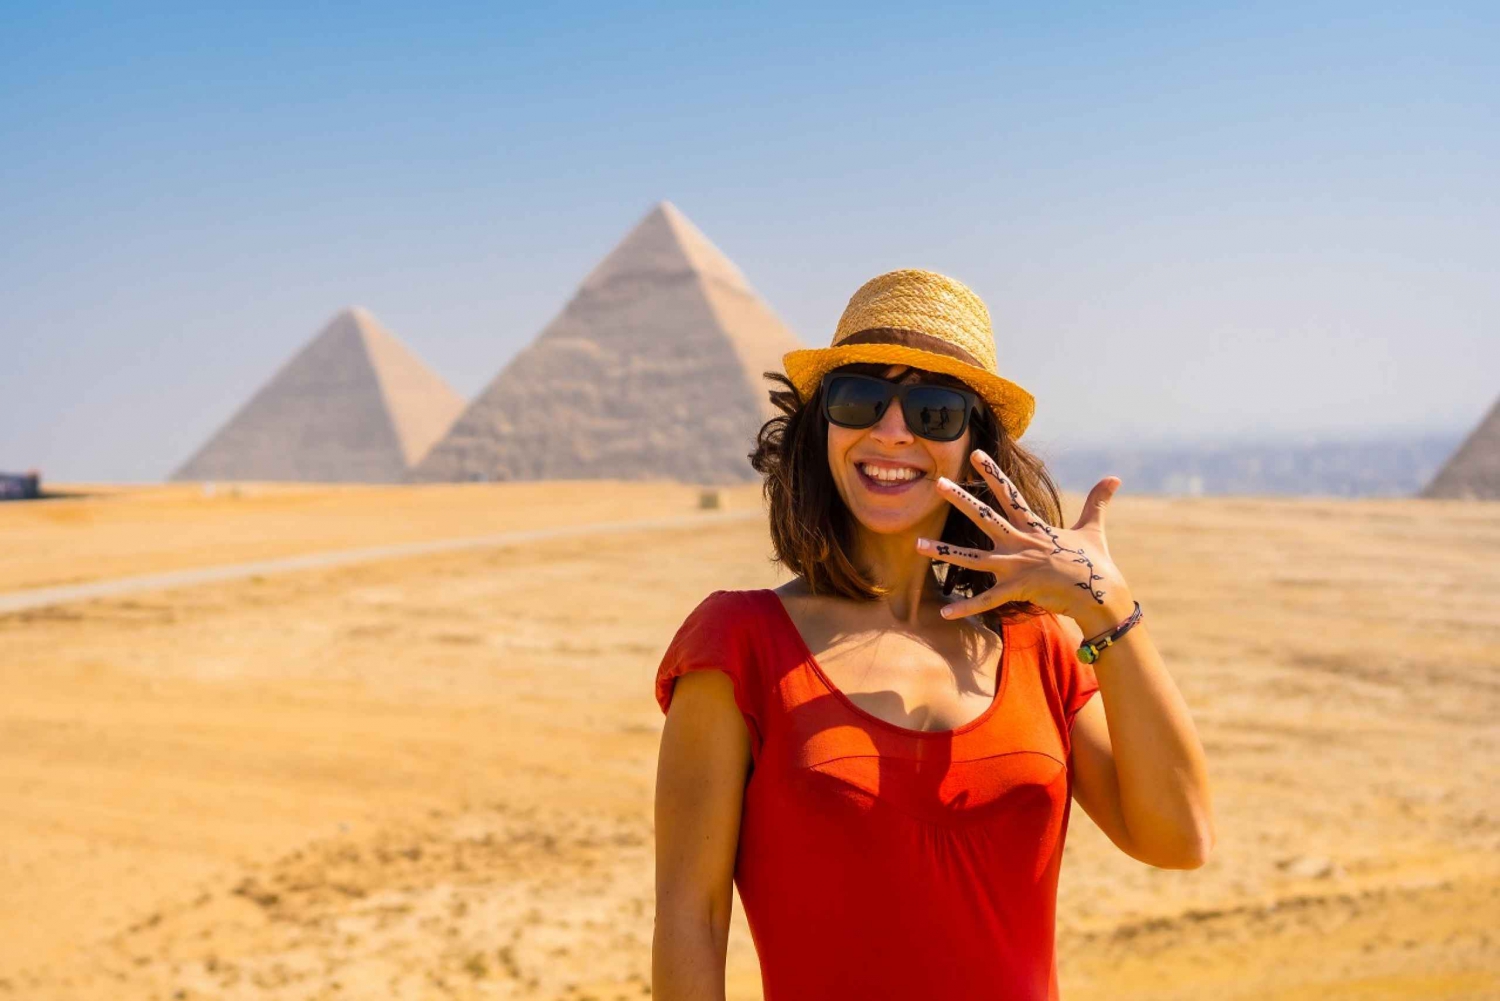 Cairo: Private Customized Full-Day Discovery Tour with Lunch